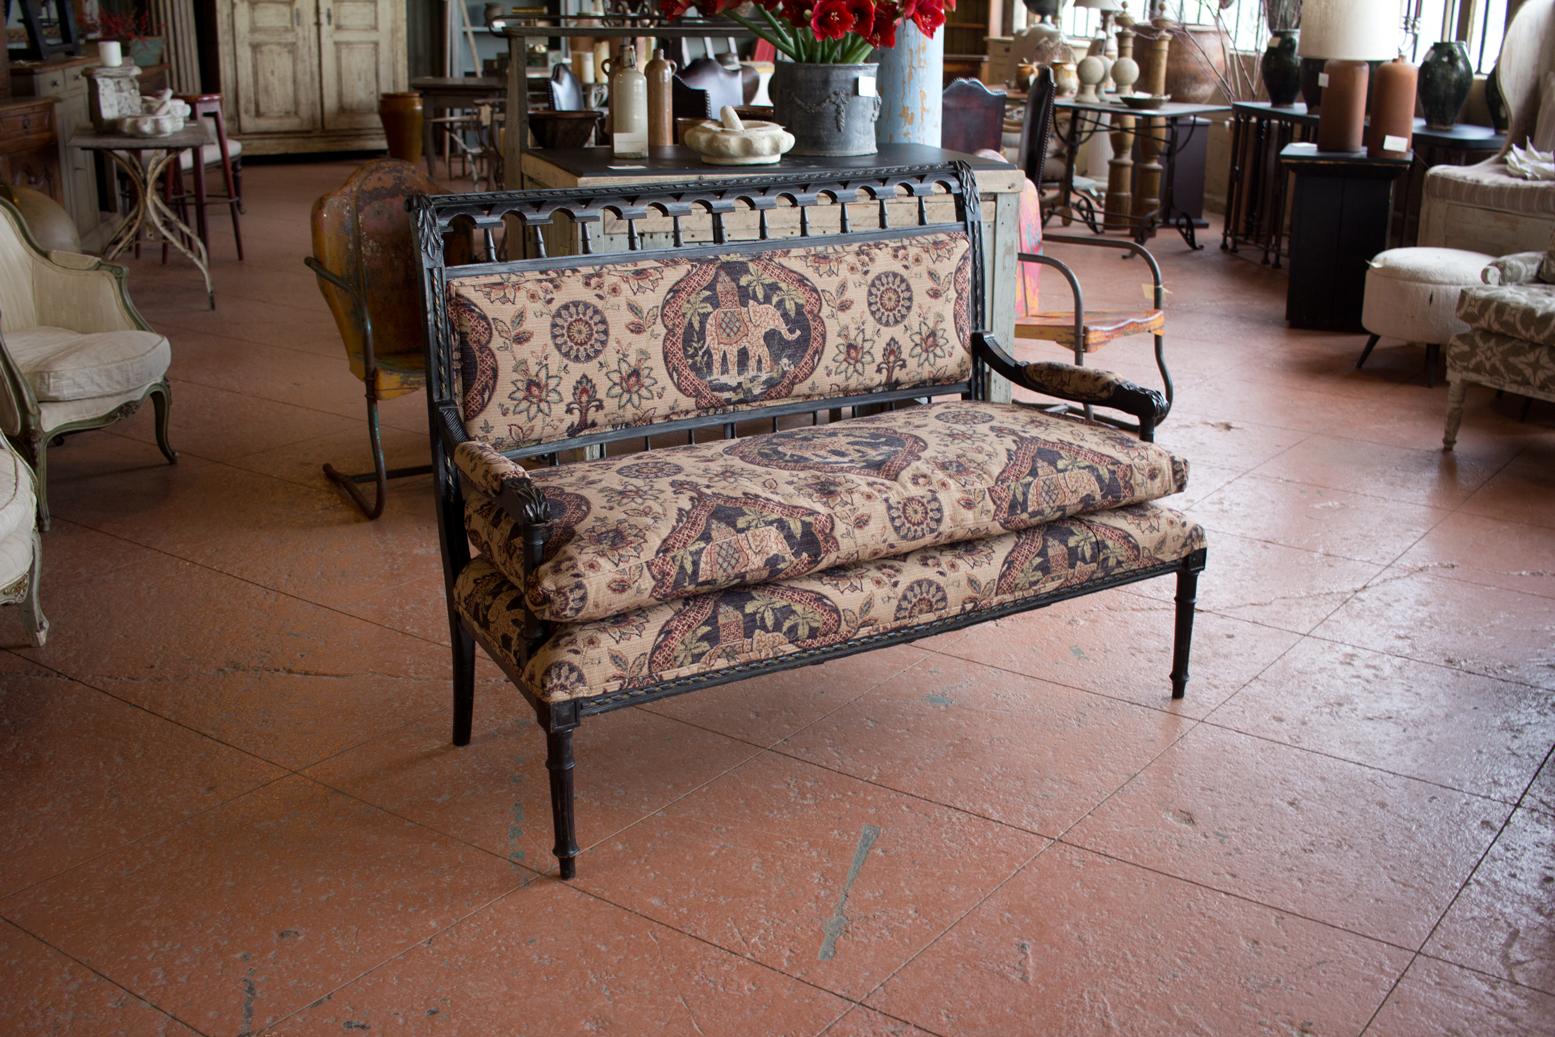 Antique Louis XVI bench style settee refurbished and with new upholstery.